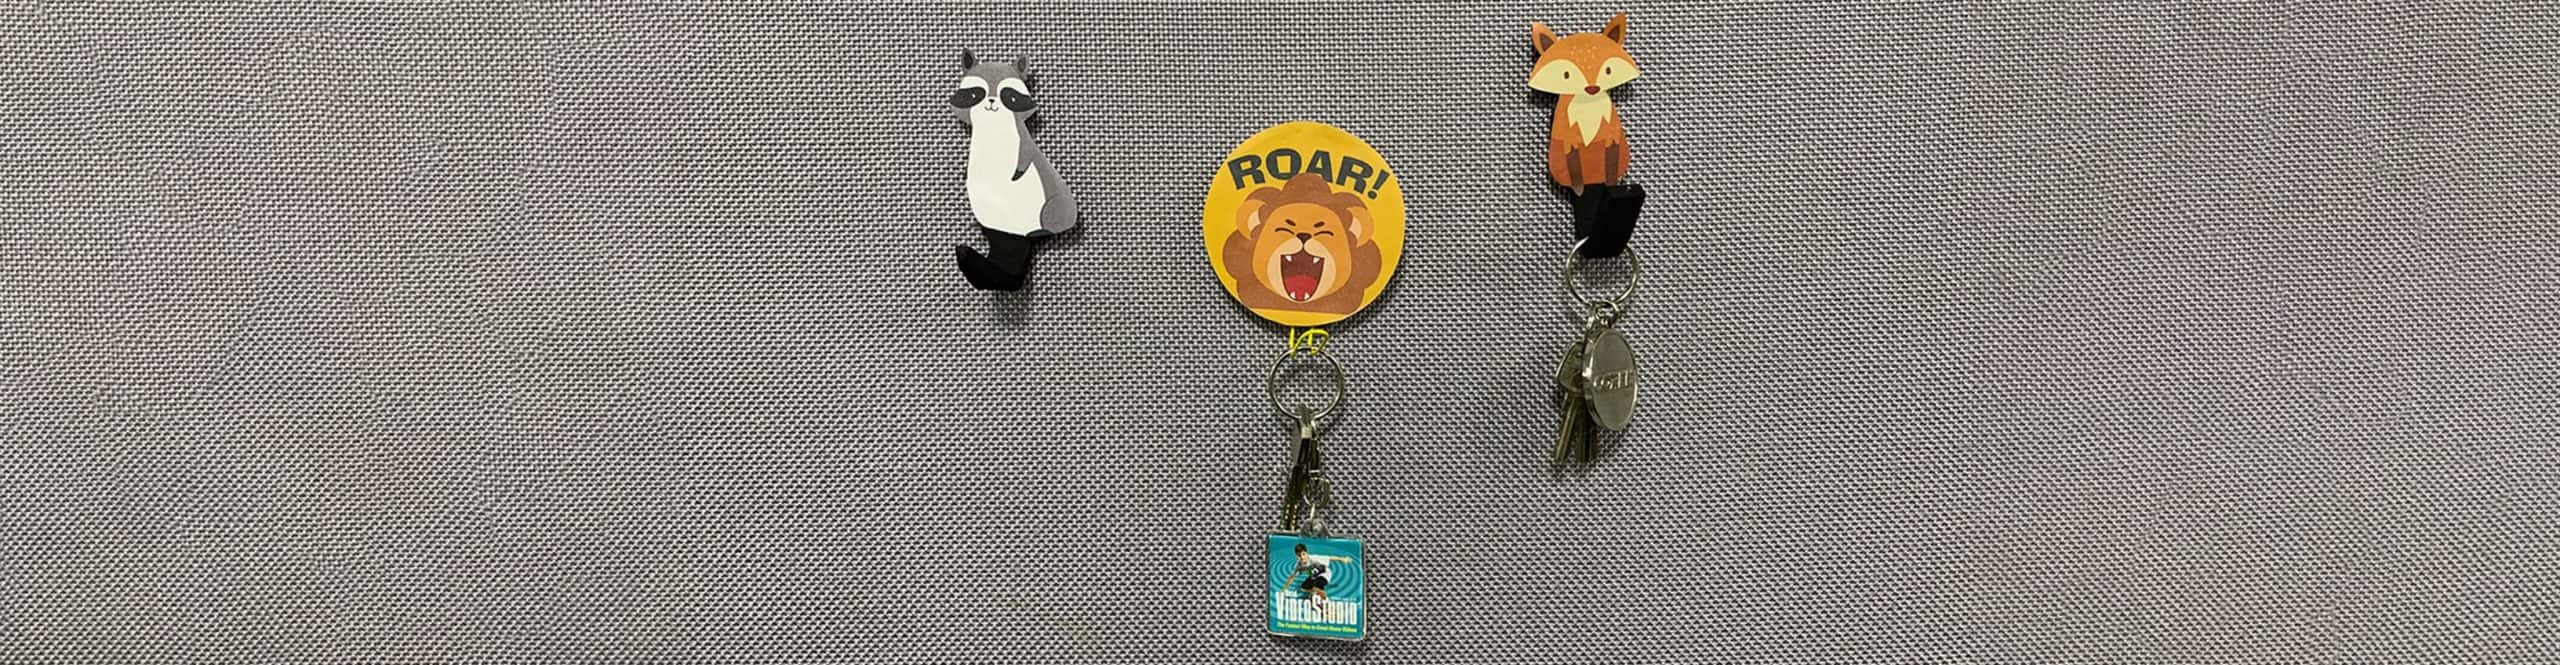 DIY Creative Magnetic Hooks - Corel Discovery Center